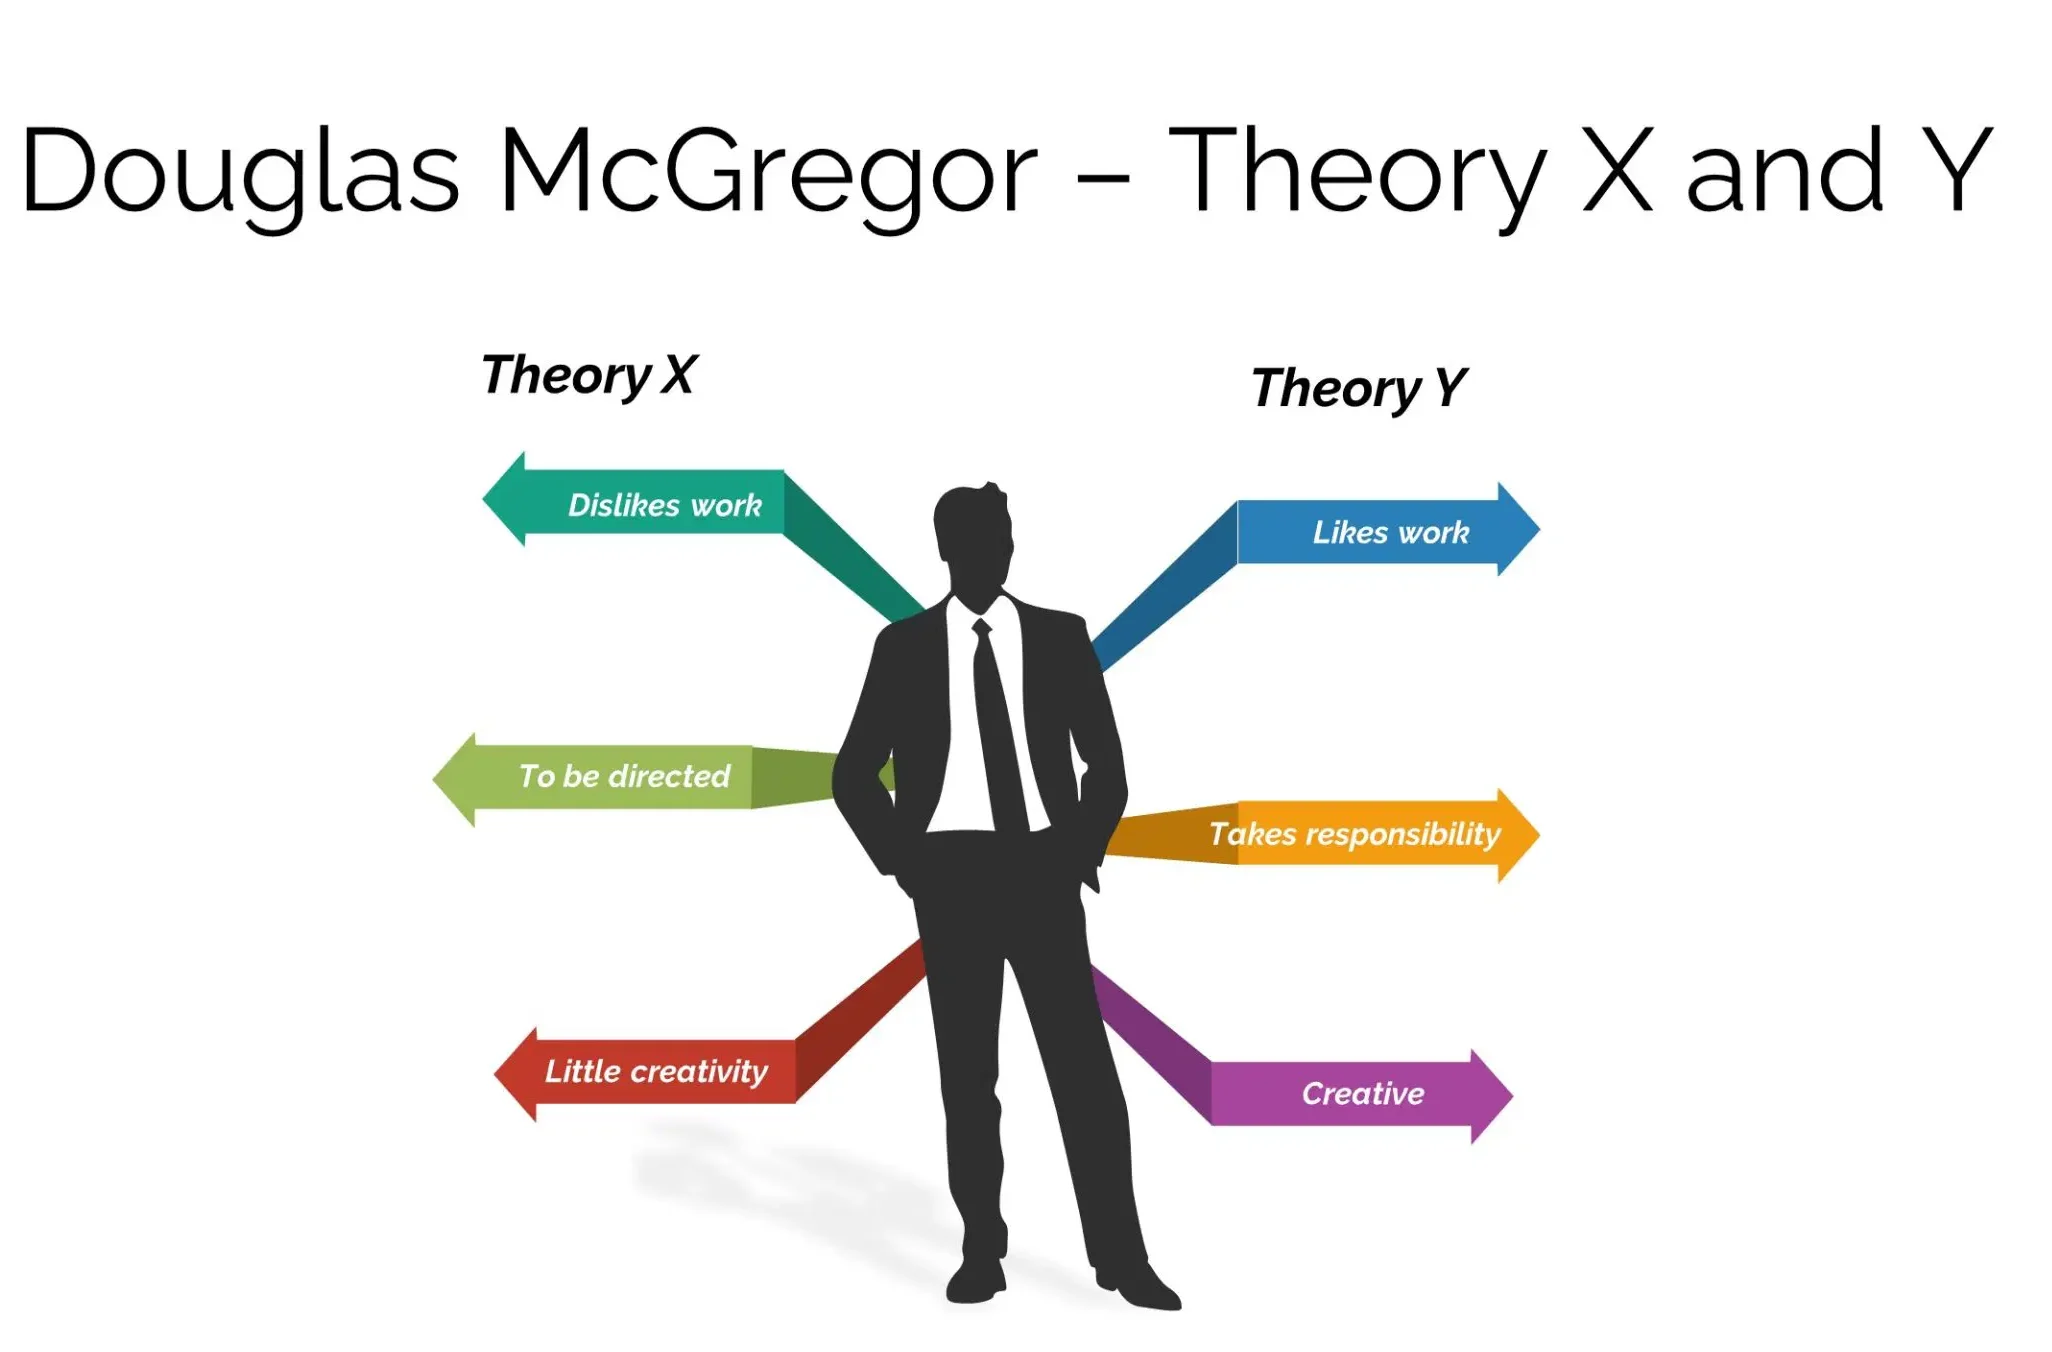 Theory X and Theory Y by Douglas McGregor